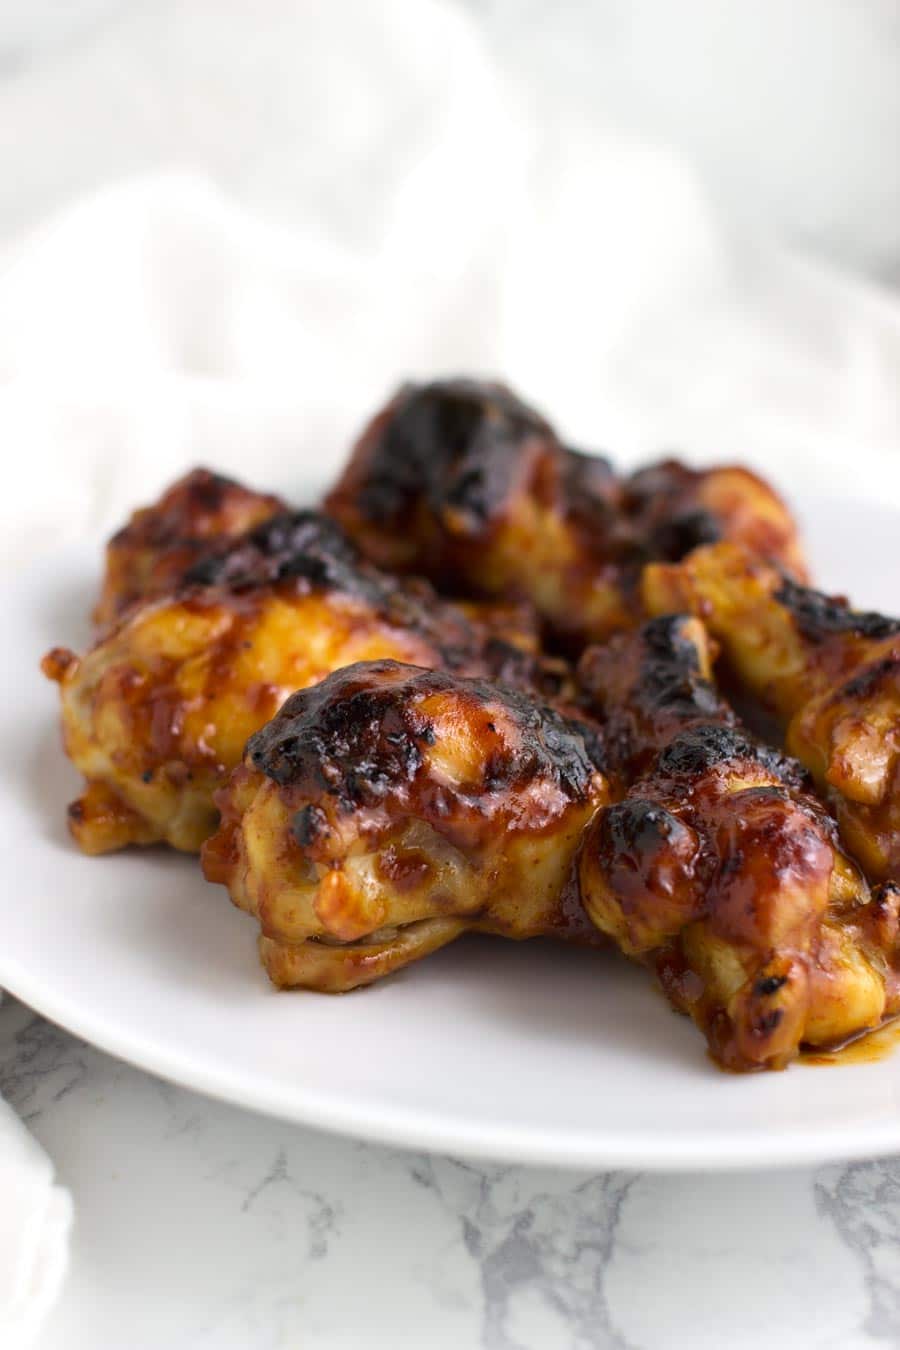 BBQ Apricot Chicken Wings recipe from acleanplate.com #aip #paleo #autoimmuneprotocol